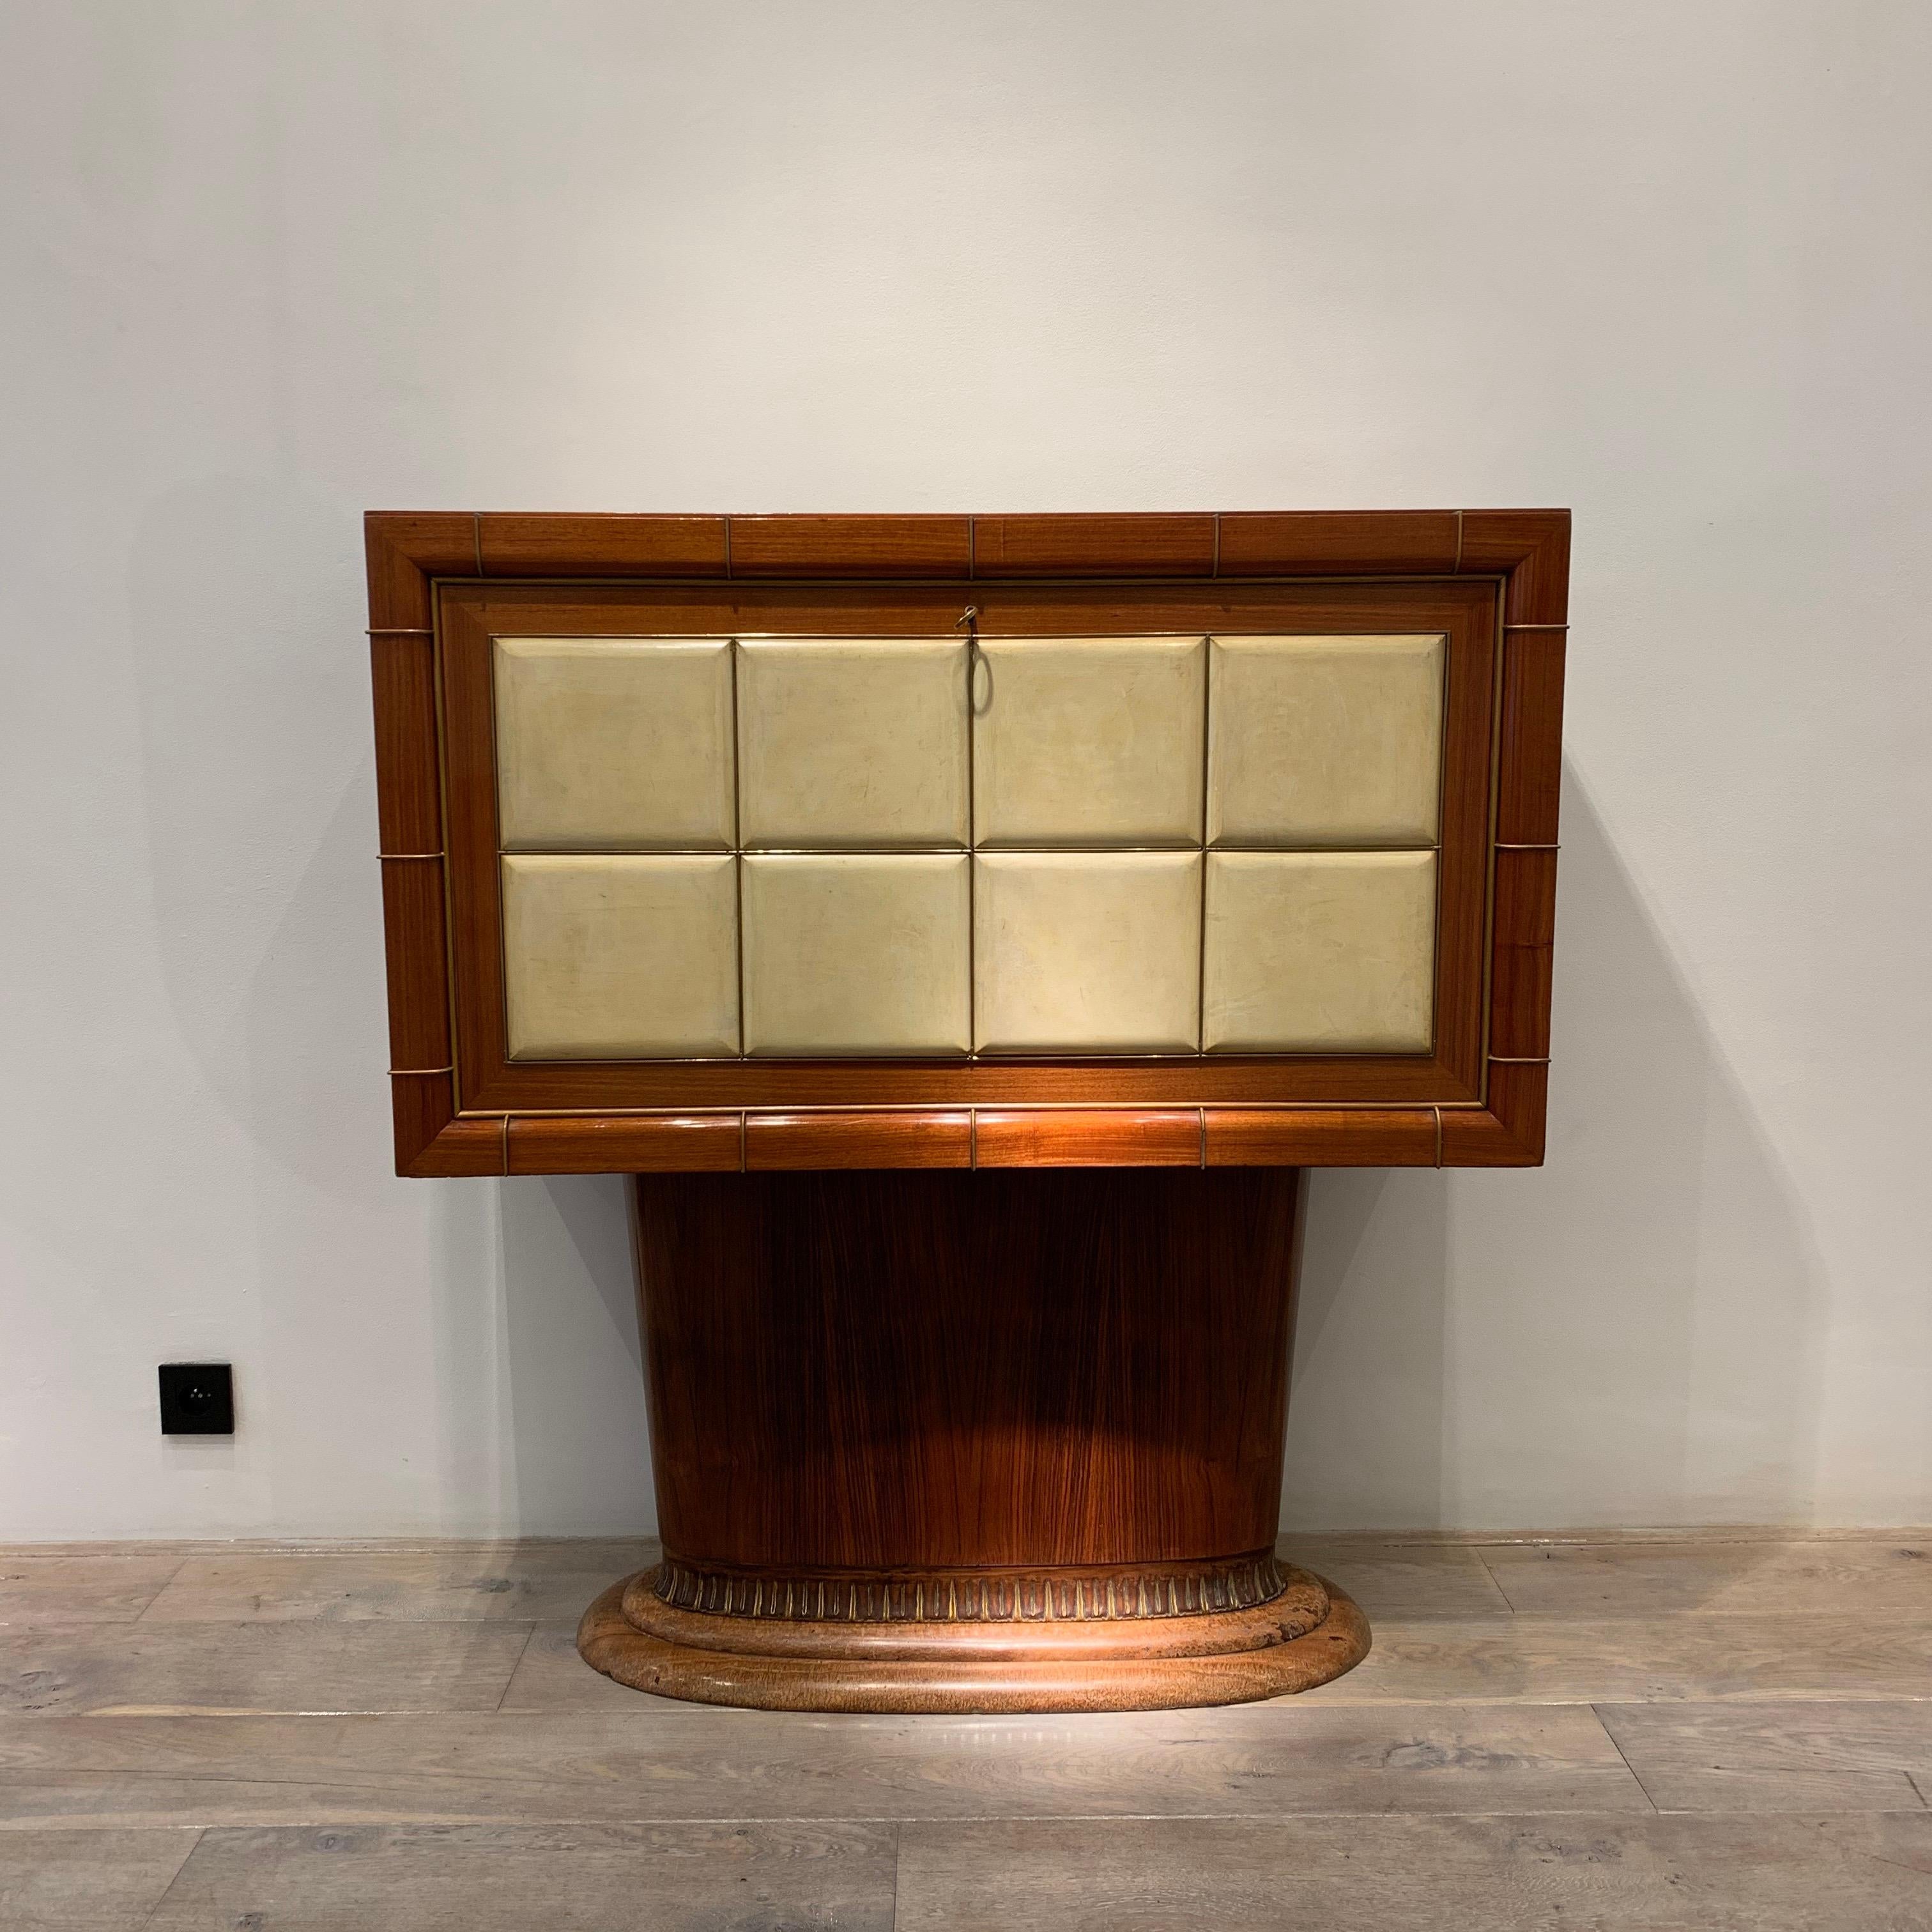 This elegant bar cabinet is made by Vittorio Dassi, the great Italian furniture maker of the 1940s. They produced quality work for a high end clientele. Their work focused on top quality materials with highly decorative execution. The piece is